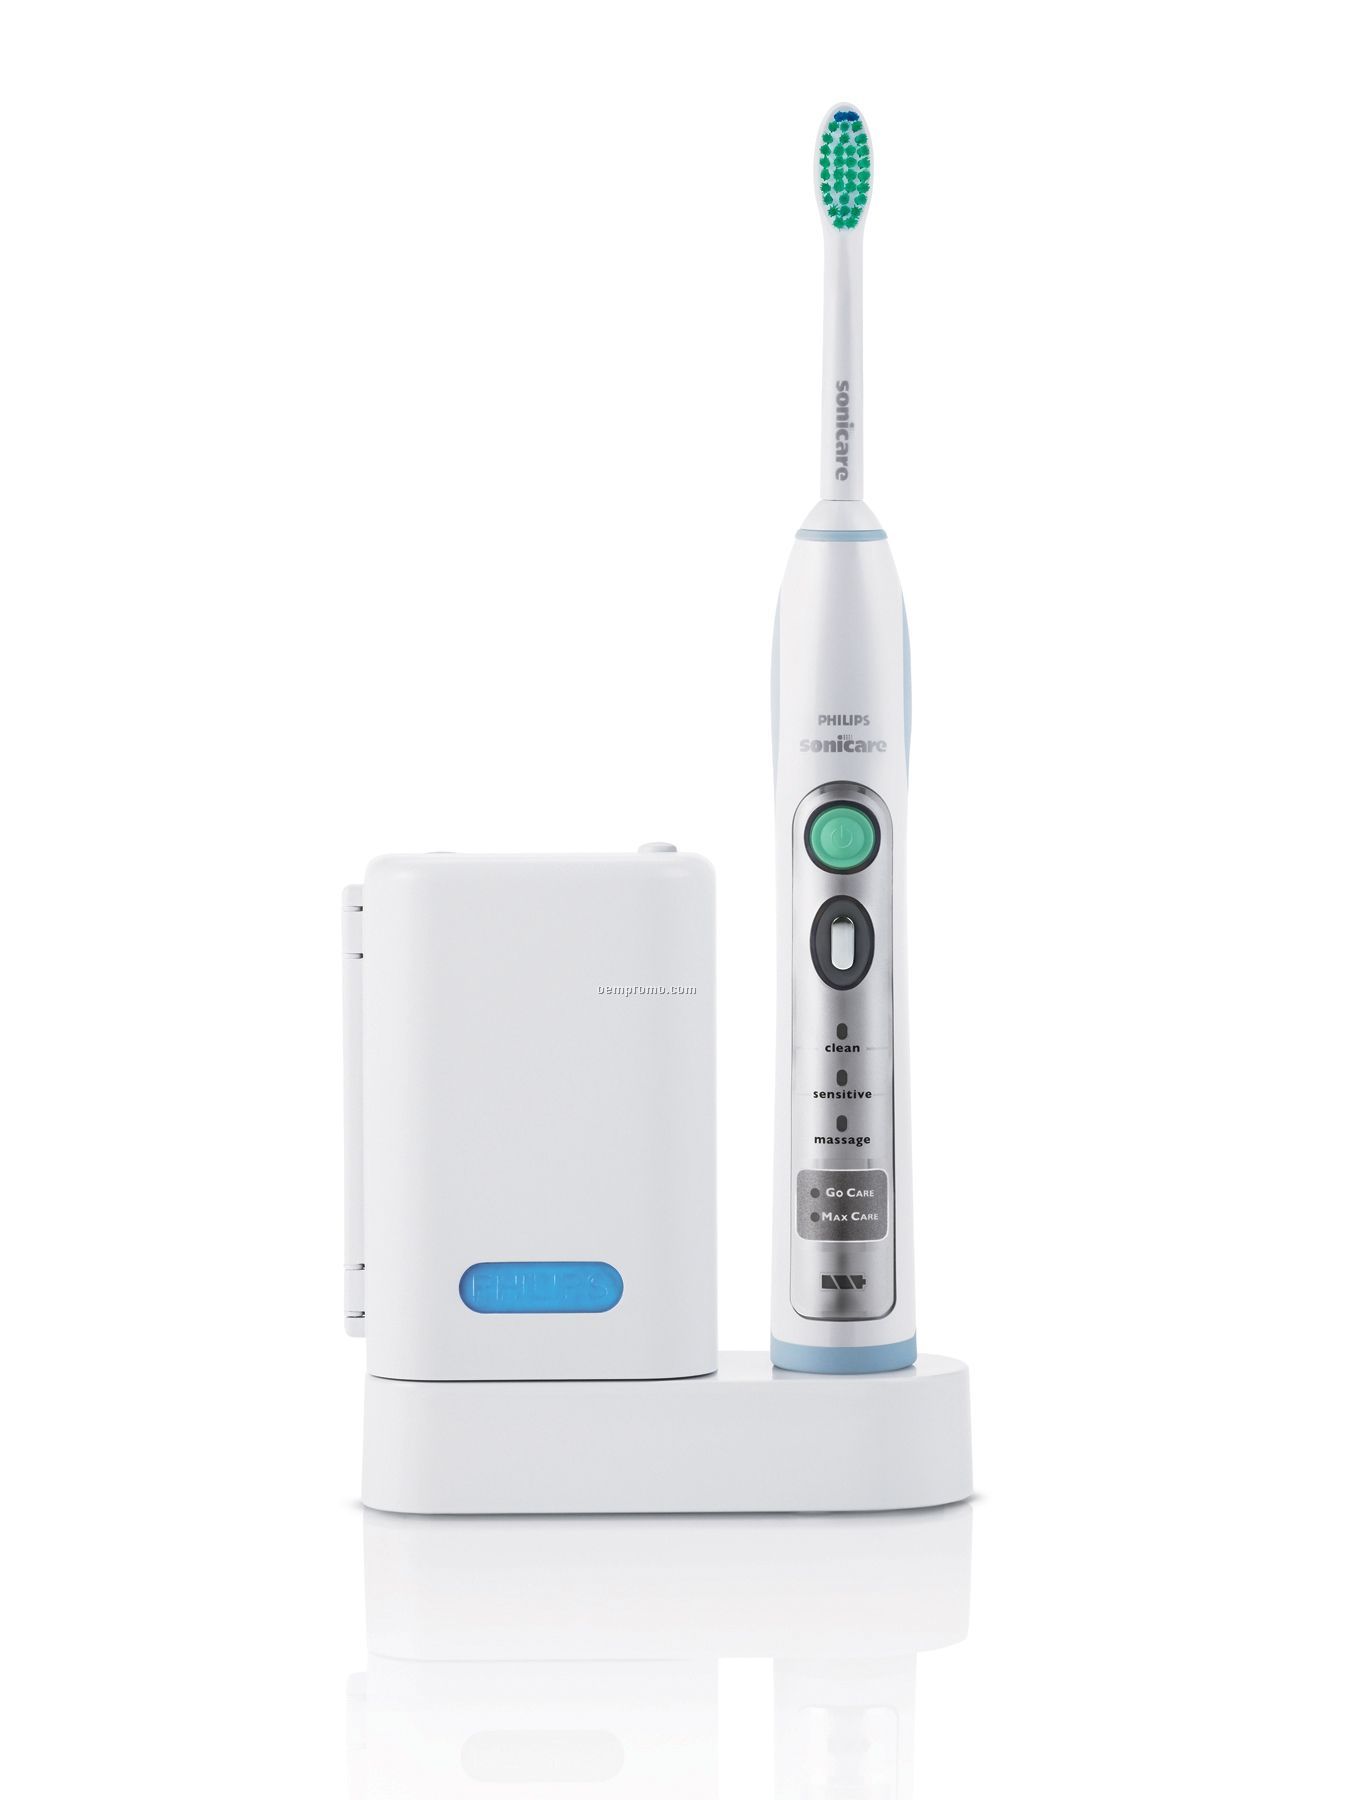 Phillips Sonicare Flexcare Sonicare Toothbrush W/ UV Sanitizing Station